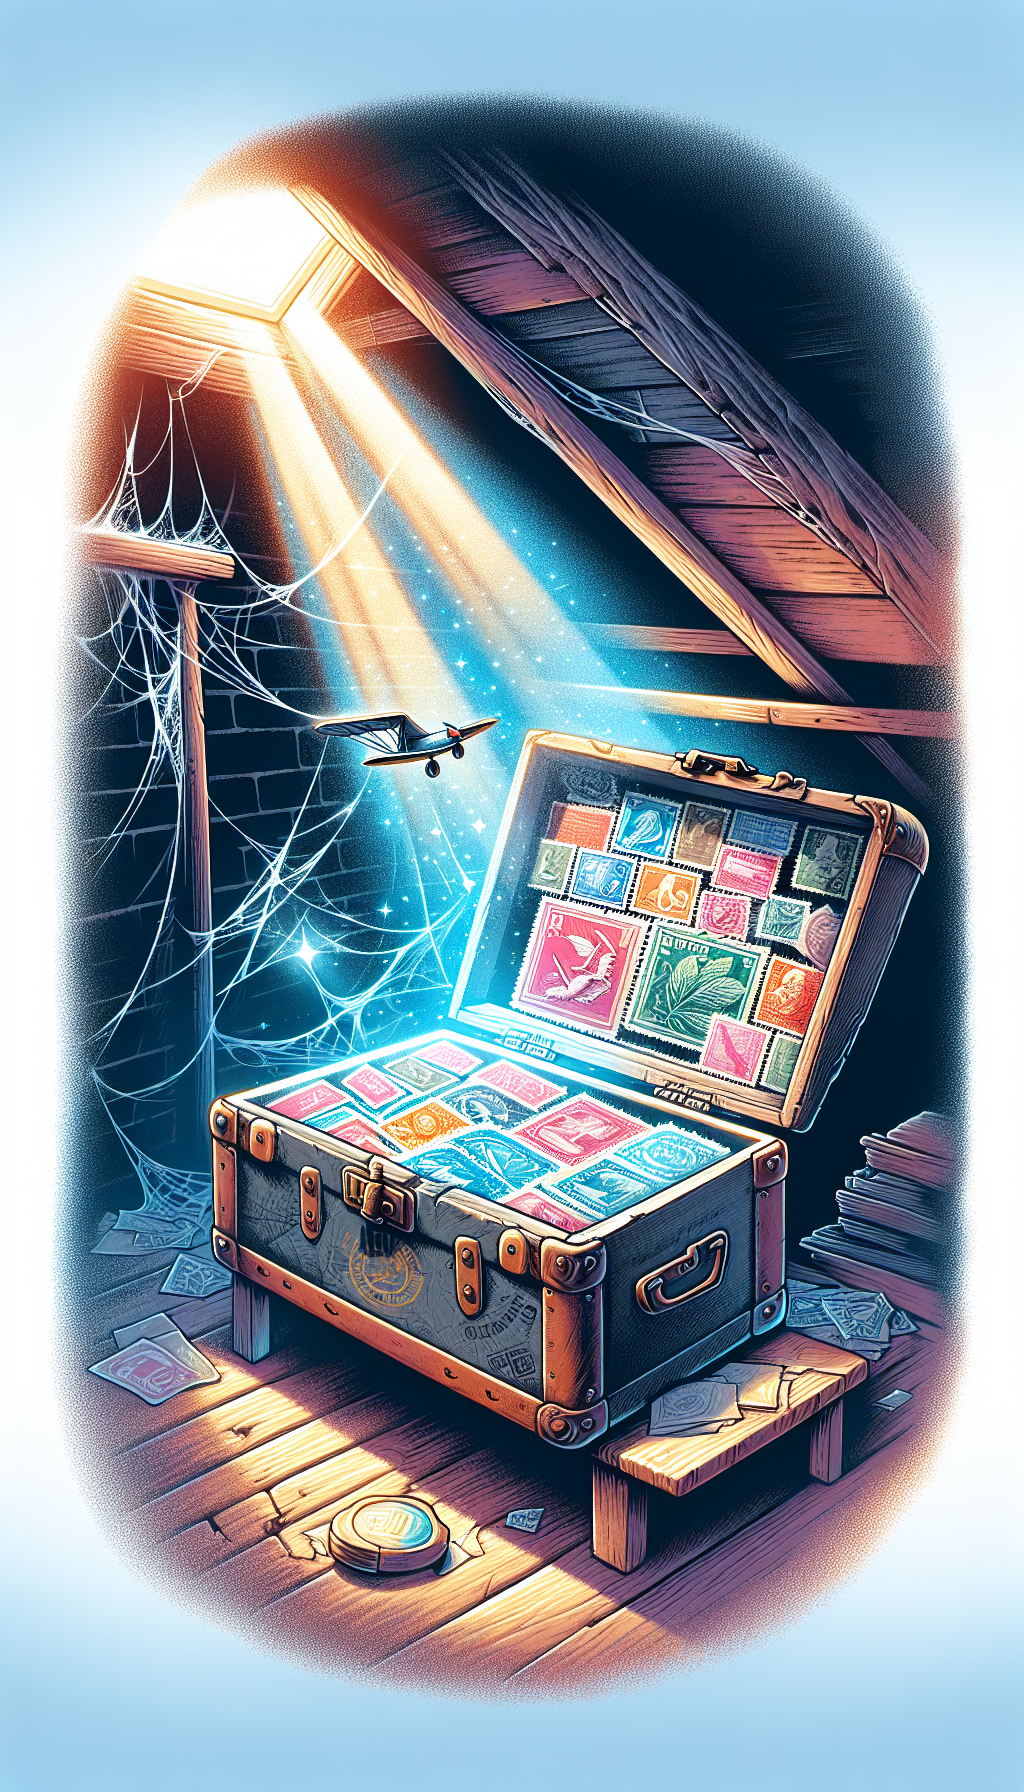 A vibrant illustration shows a dusty attic corner with a cobwebbed chest opening to reveal a shining beam of light onto an old stamp album. Amongst the stamps, one, with a vintage airplane, glimmers like a gem, hinting at high value. The juxtaposition of the attic's forgotten feel with the treasure-like glow captures the transition from neglect to worth.